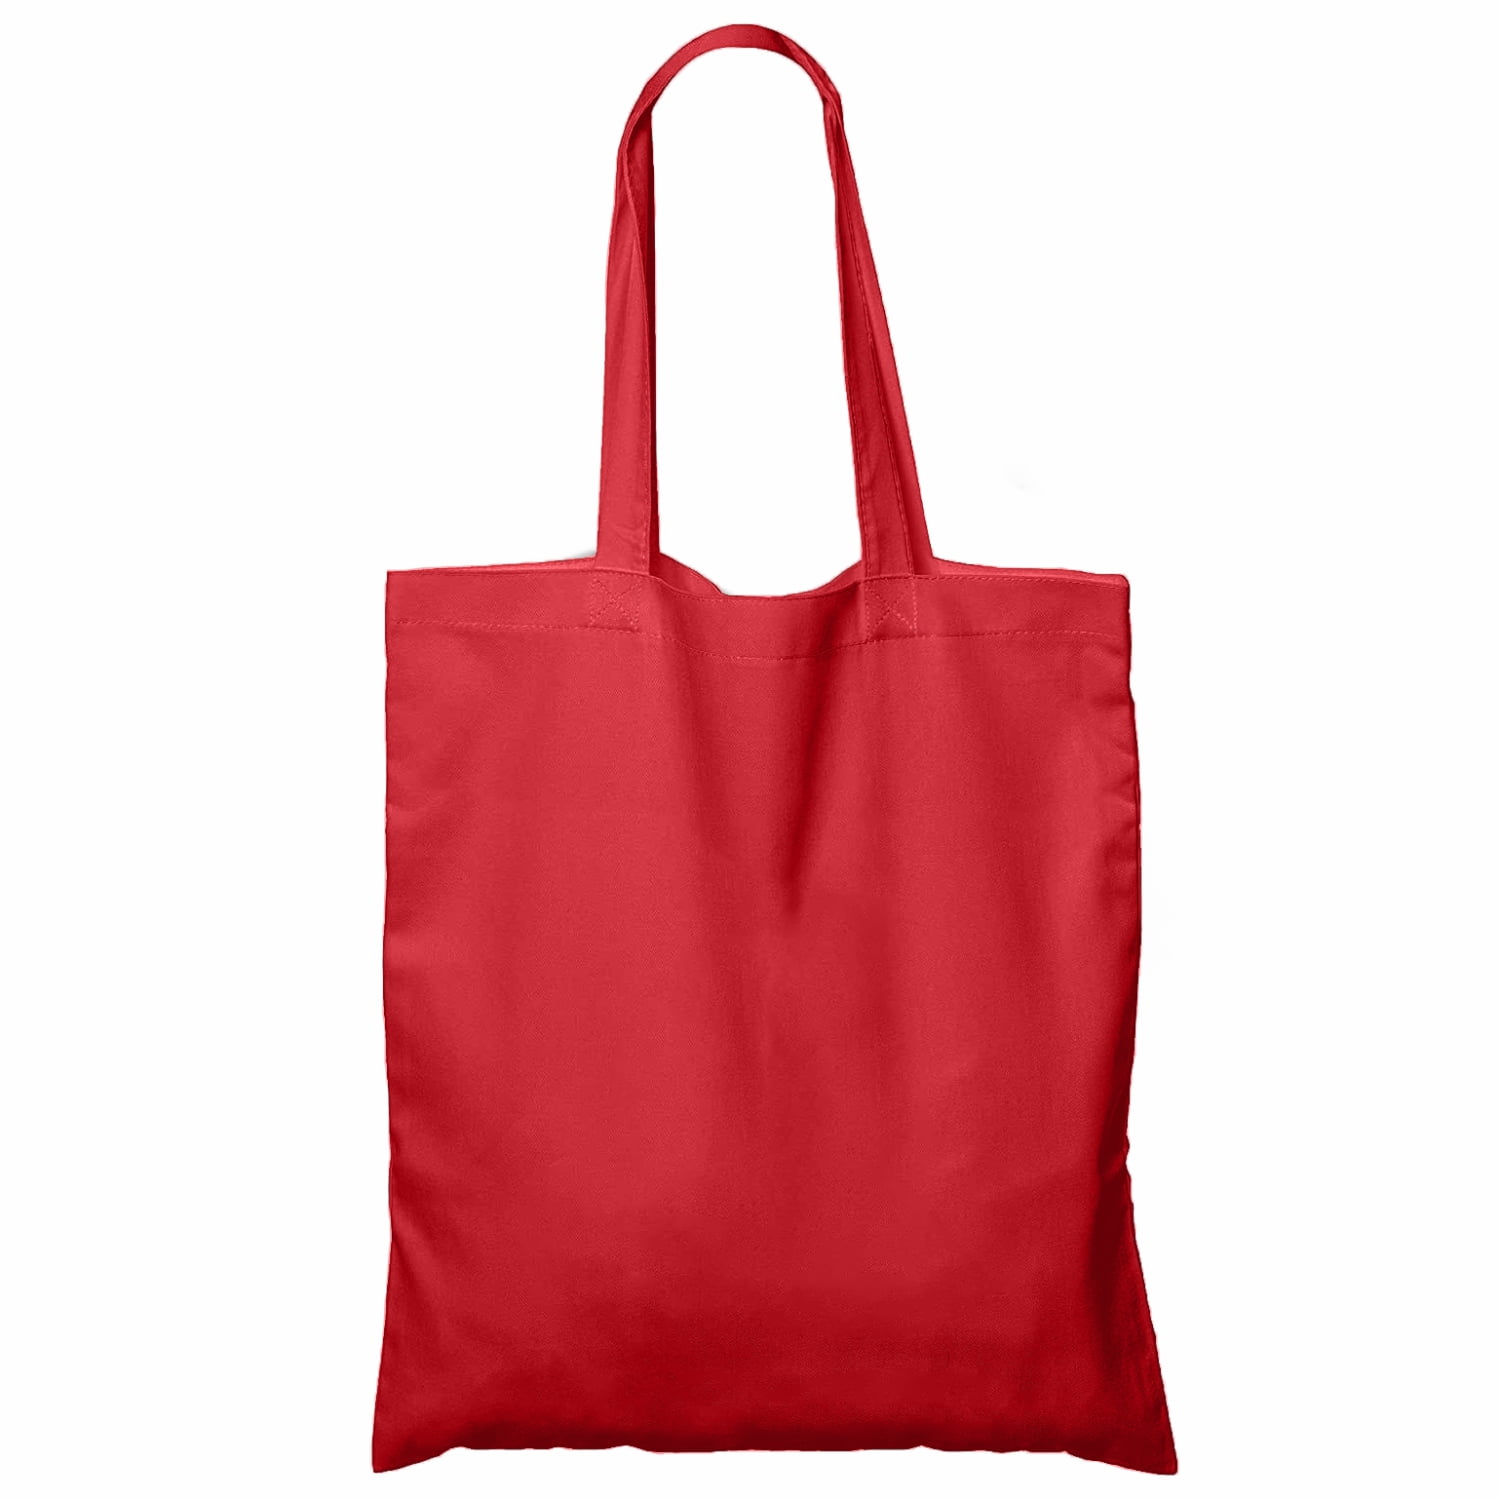 TOPDesign 5 | 12 | 24 | 48 Pack Economical Cotton Tote Bag, Lightweight  Medium Reusable Grocery Shopping Cloth Bags, Suitable for DIY, Advertising